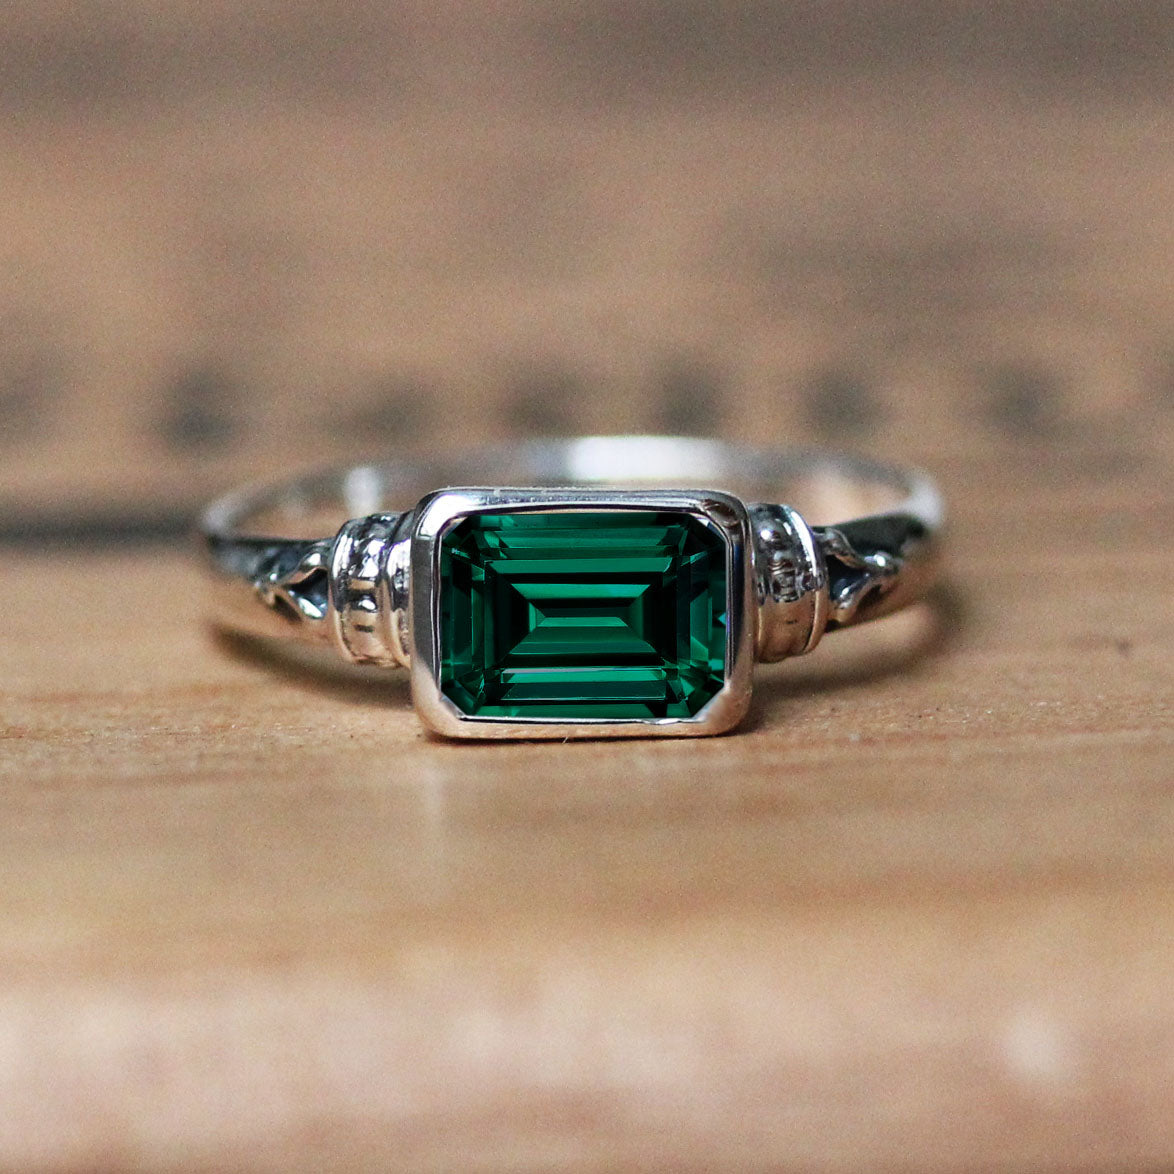 green emerald ring that is emerald cut and bezel set into a sterling silver vintage style setting